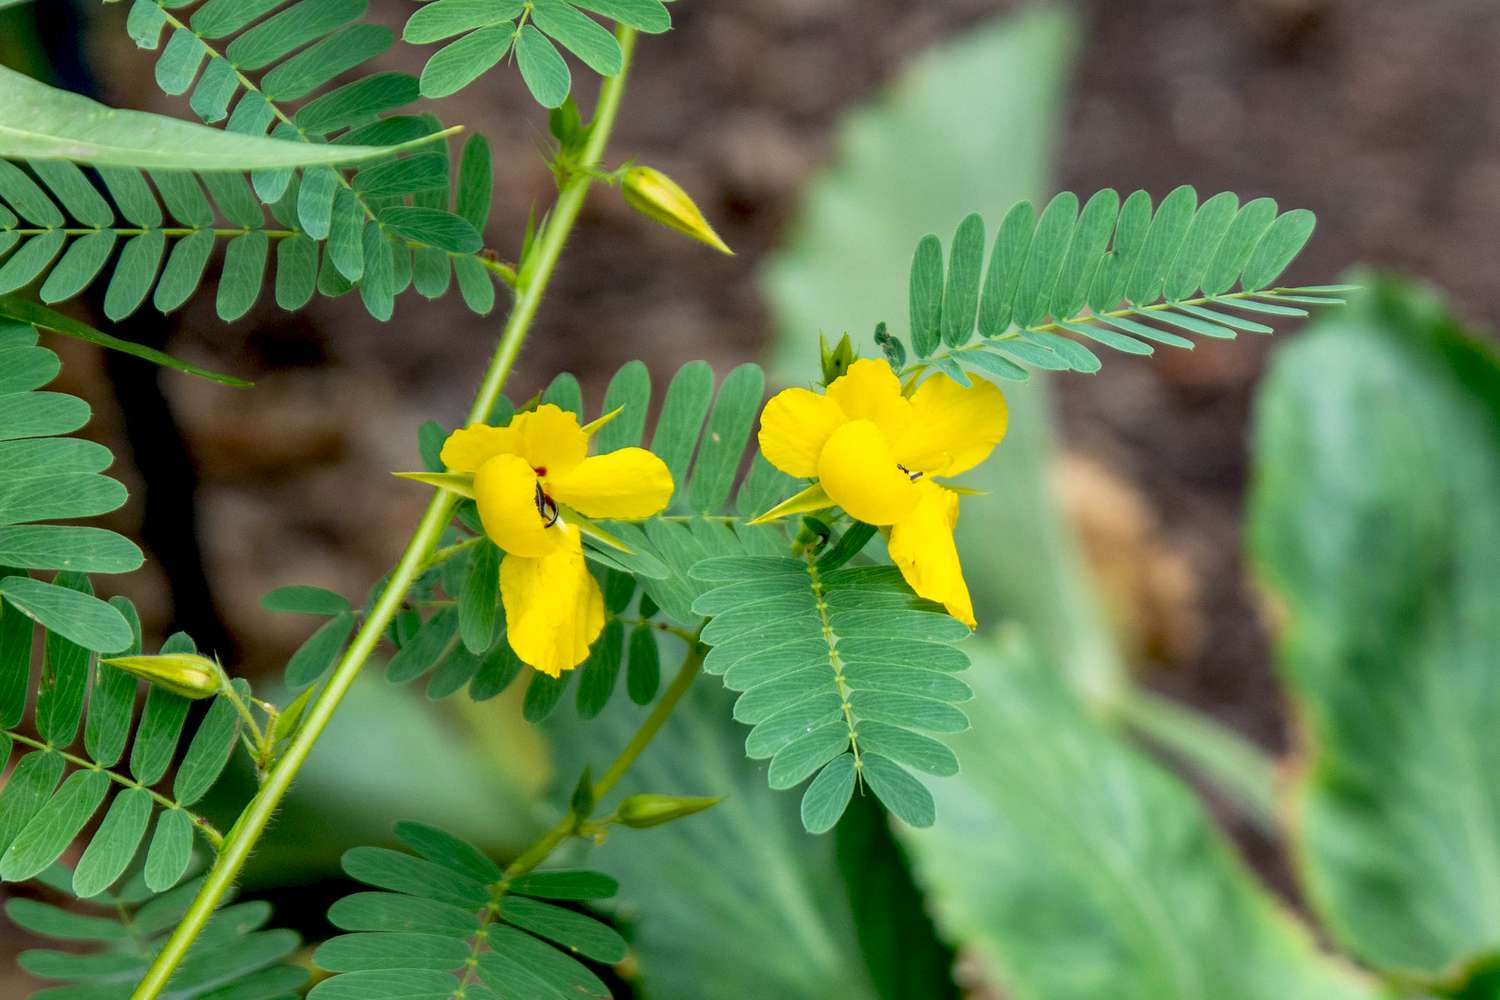 Partridge pea plant stem with yellow flowers and buds next to feathery leaves closeup ?